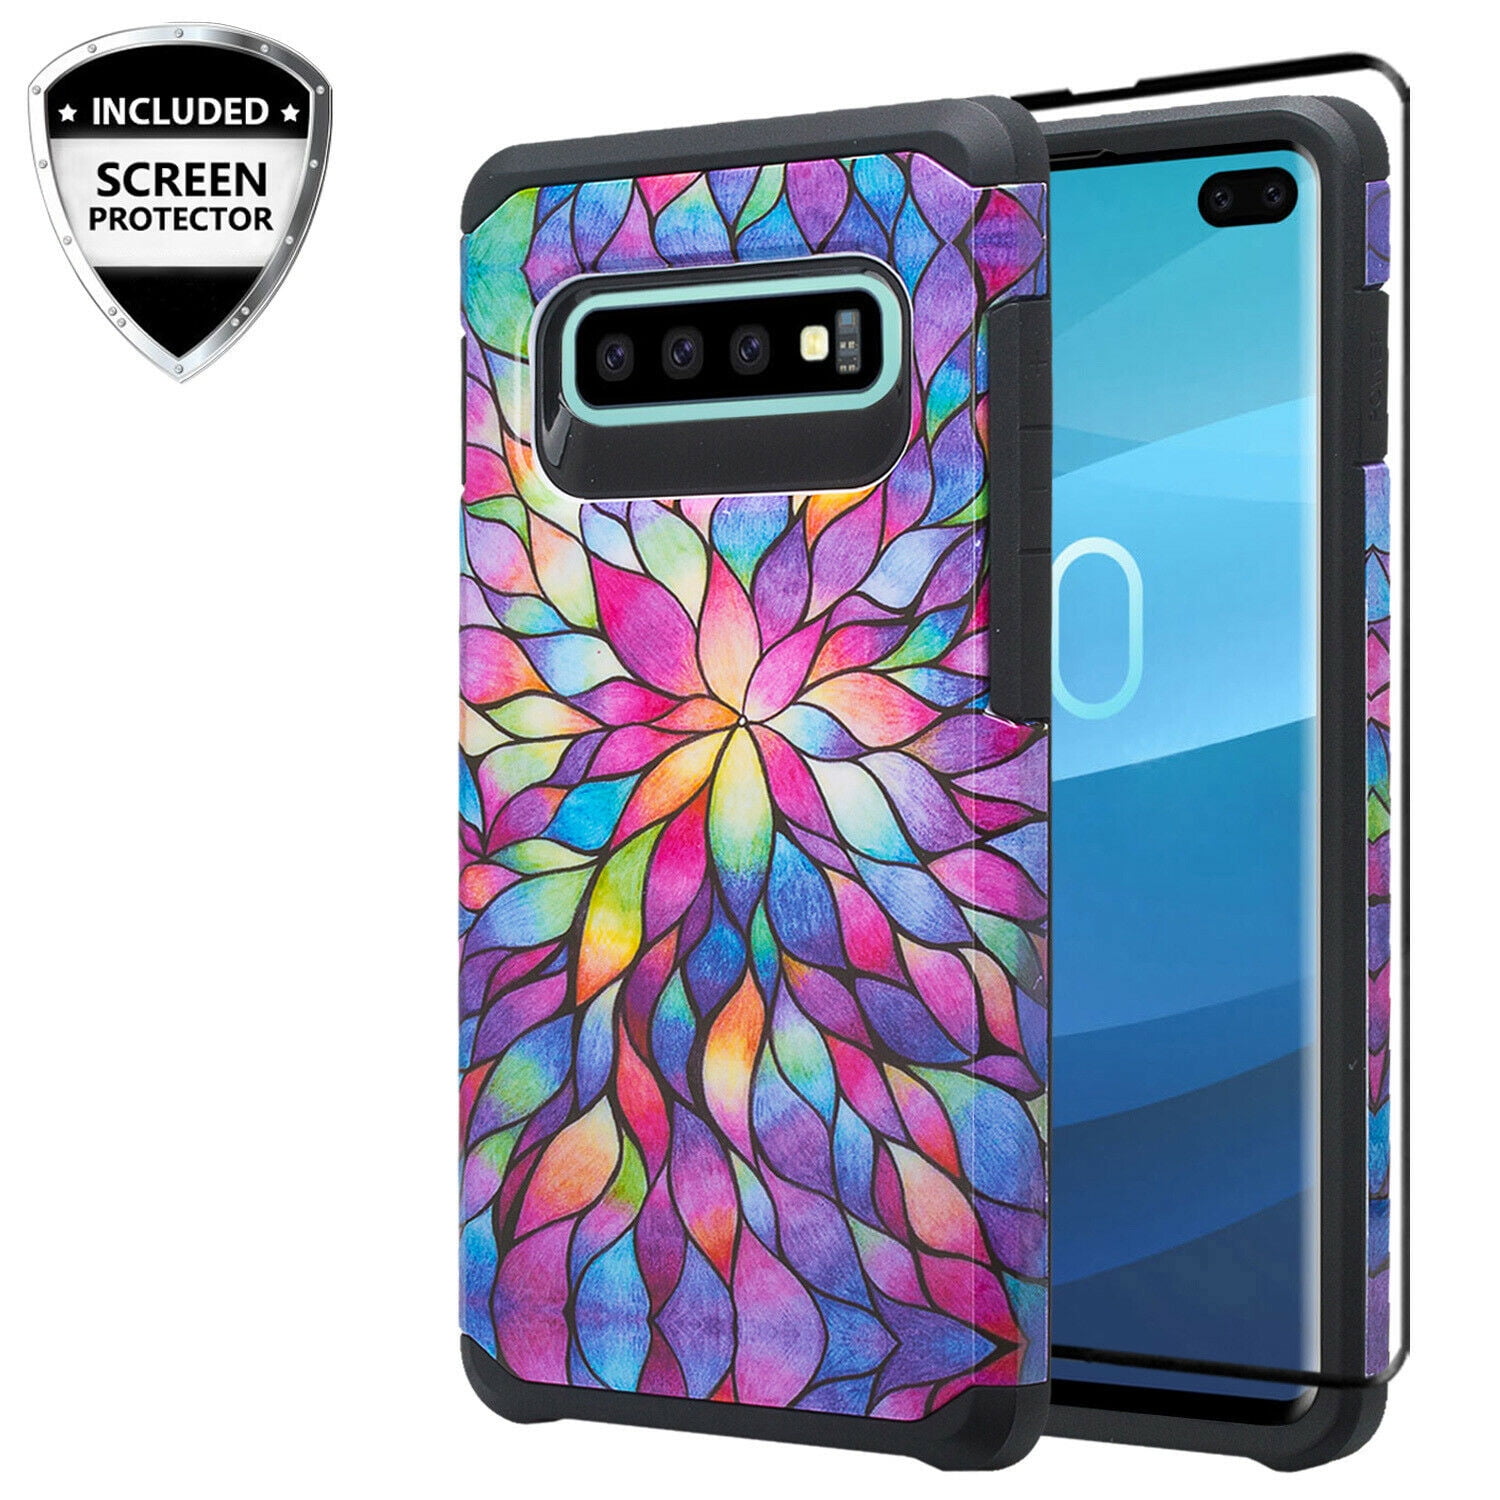 Ysimee Compatible with Case Samsung Galaxy S10 Plus Silicone Rubber Soft Frame Ultra Slim Gel TPU Bumper Shock Absorption Girls Women Shockproof Protector Bling Glitter Sparkle Hard Back Covers,Black 